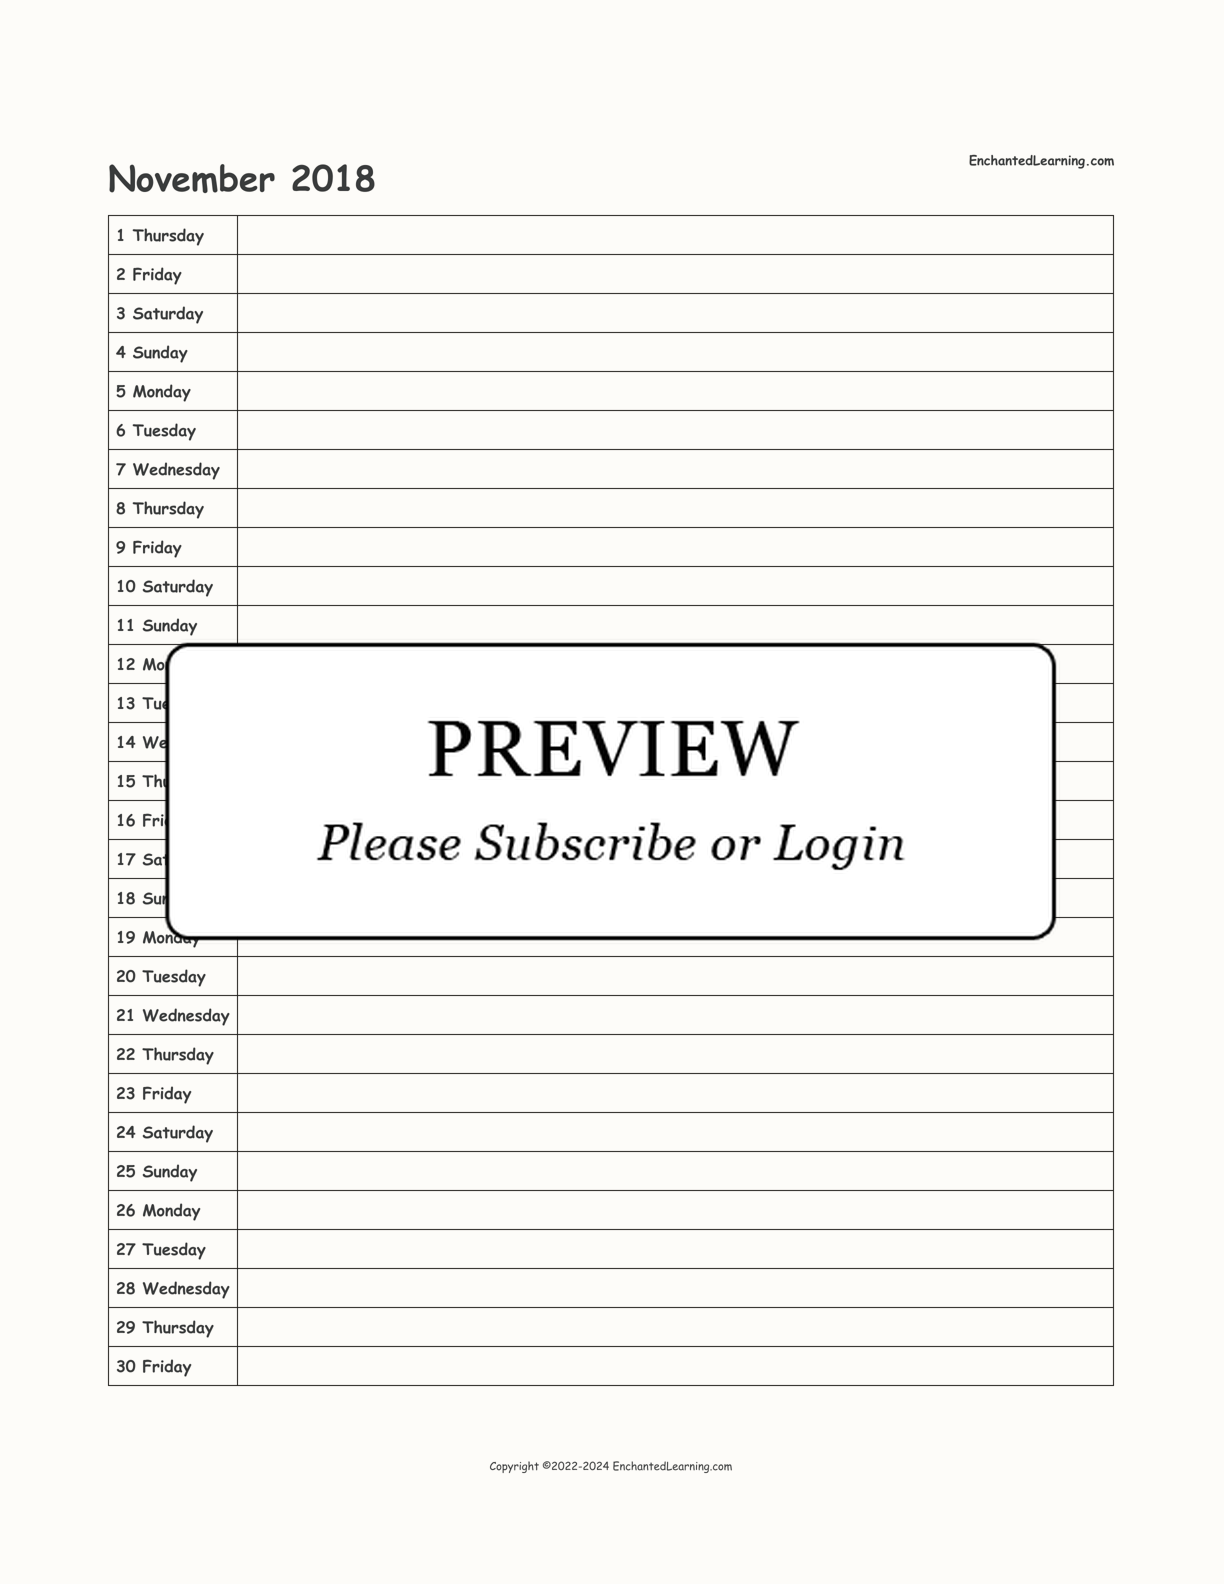 2018 Scheduling Calendar interactive printout page 11